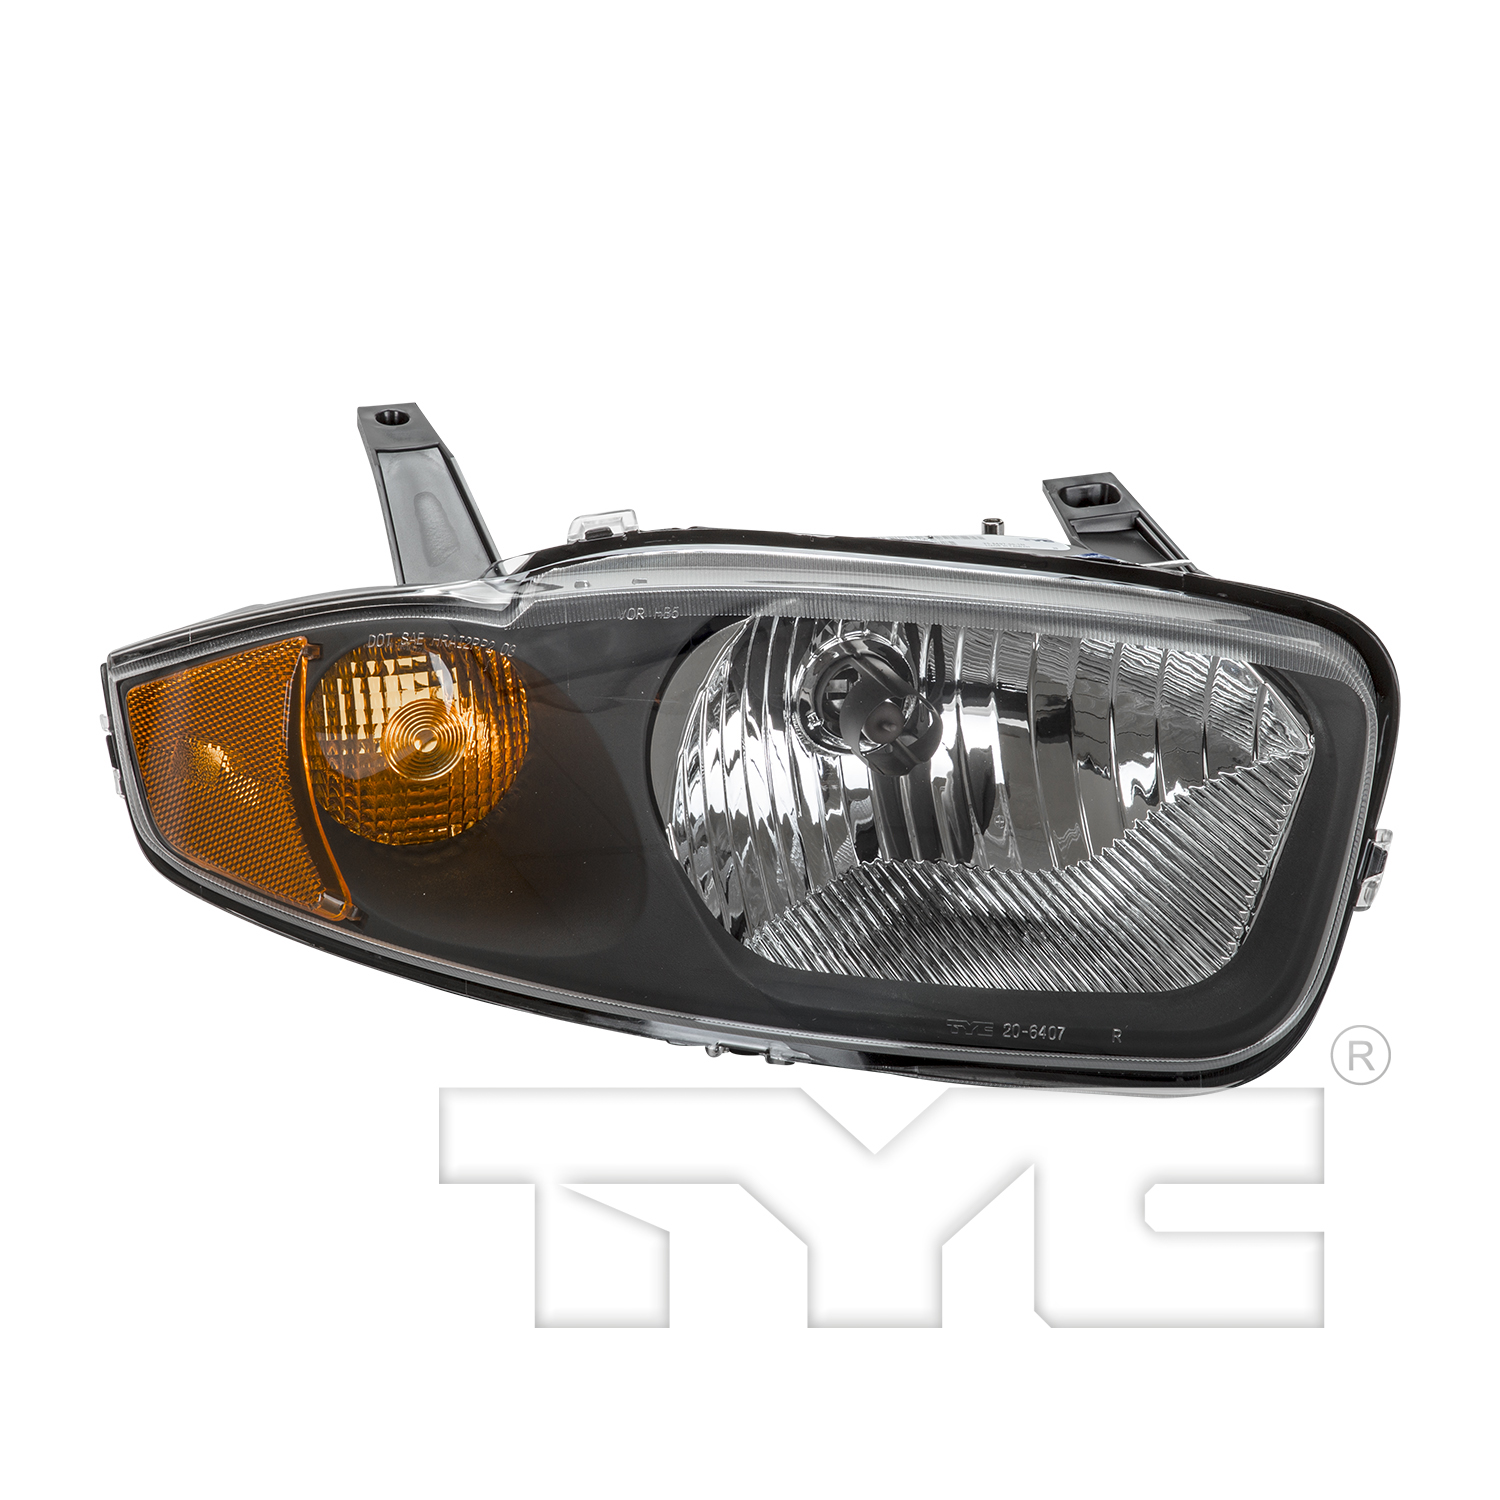 Replacement CHEVROLET CAVALIER HEADLIGHTS | Aftermarket HEADLIGHTS for